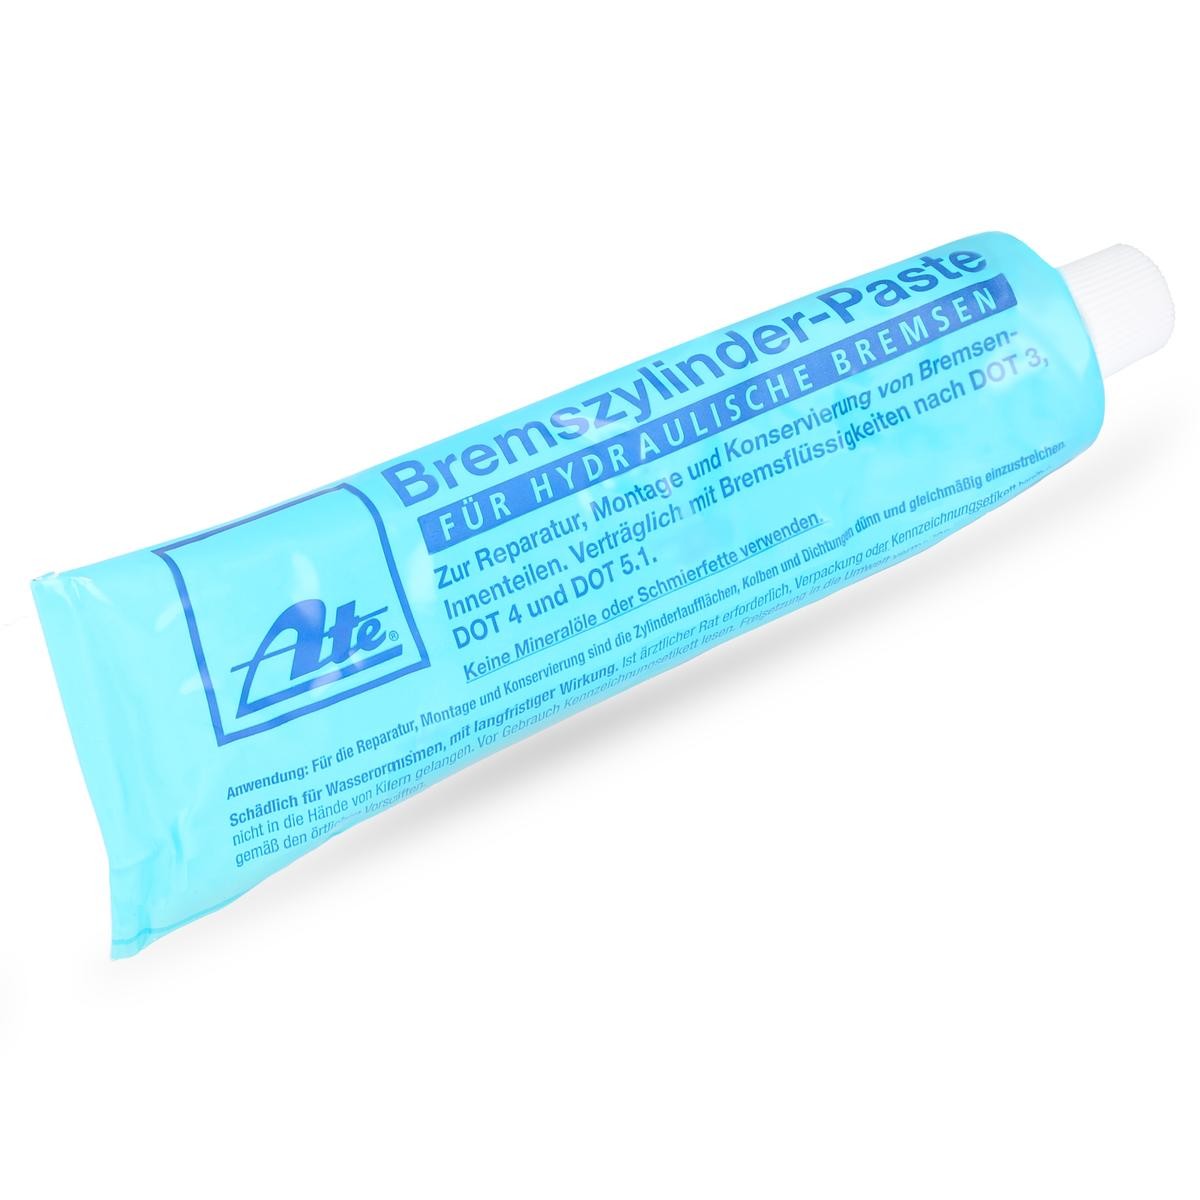 ATE 03990205212 Assembly paste Tube, Weight: 180g